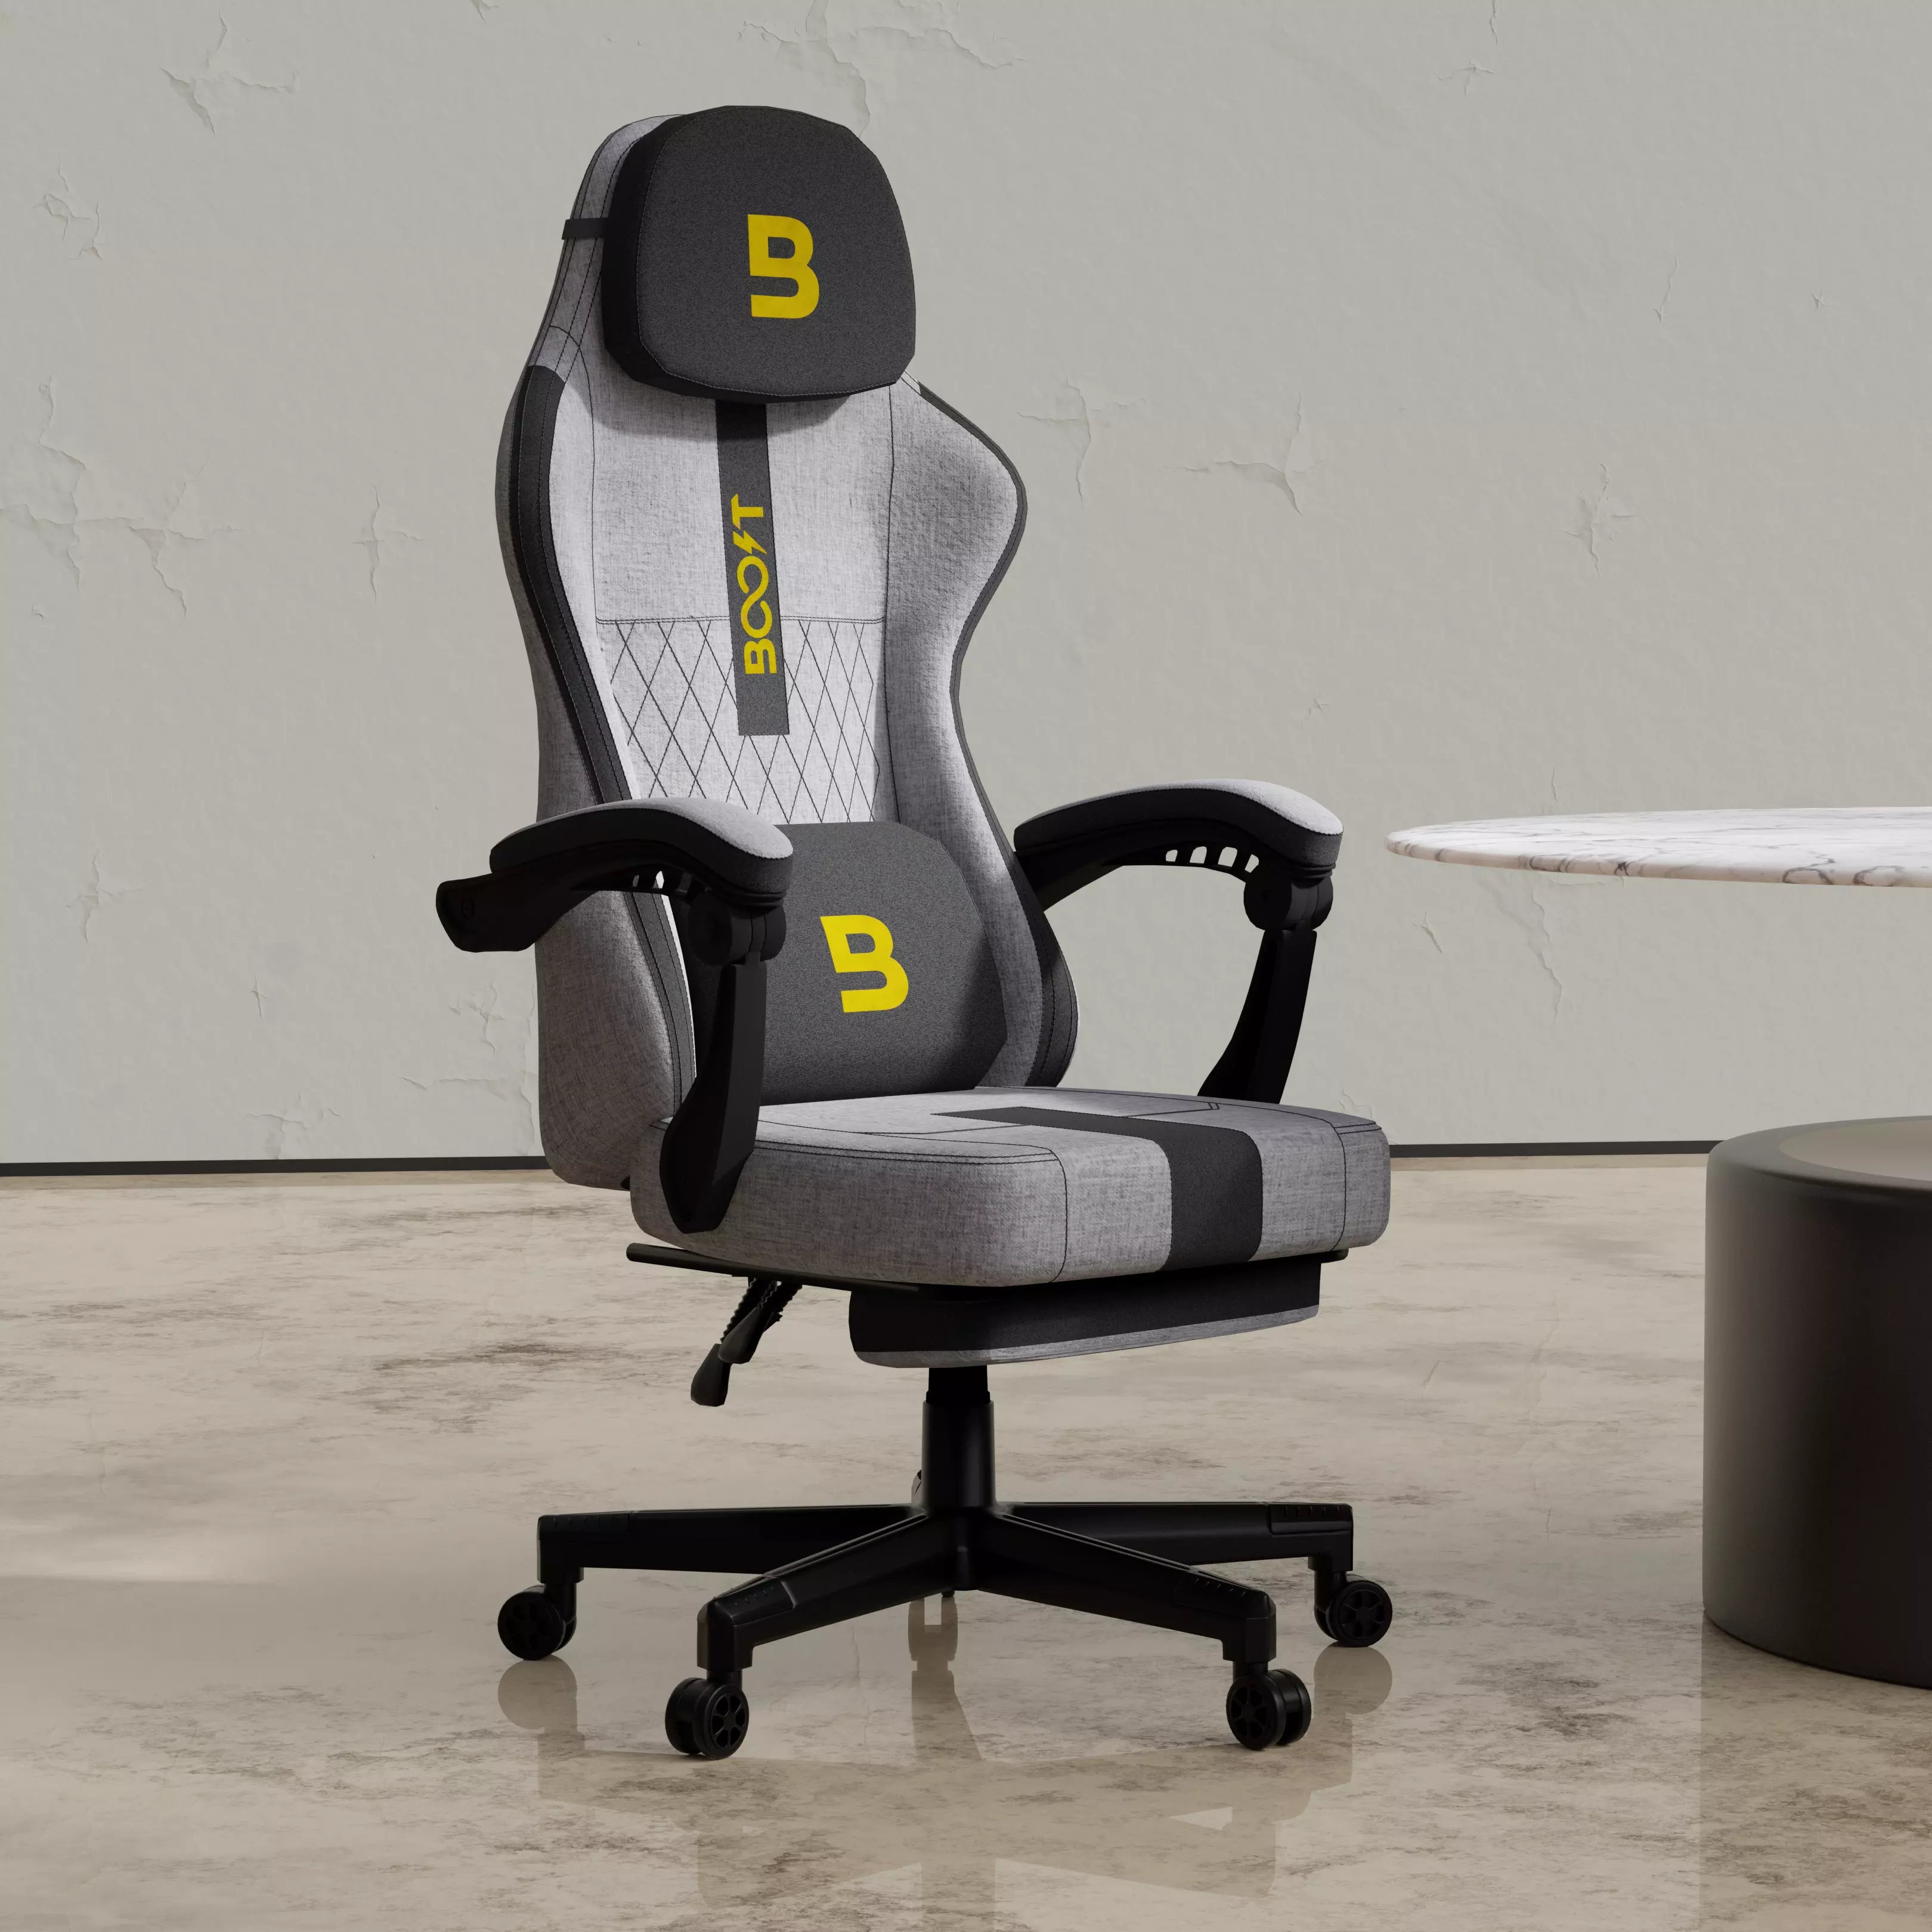 Boost Surge Pro Ergonomic Chair With Footrest